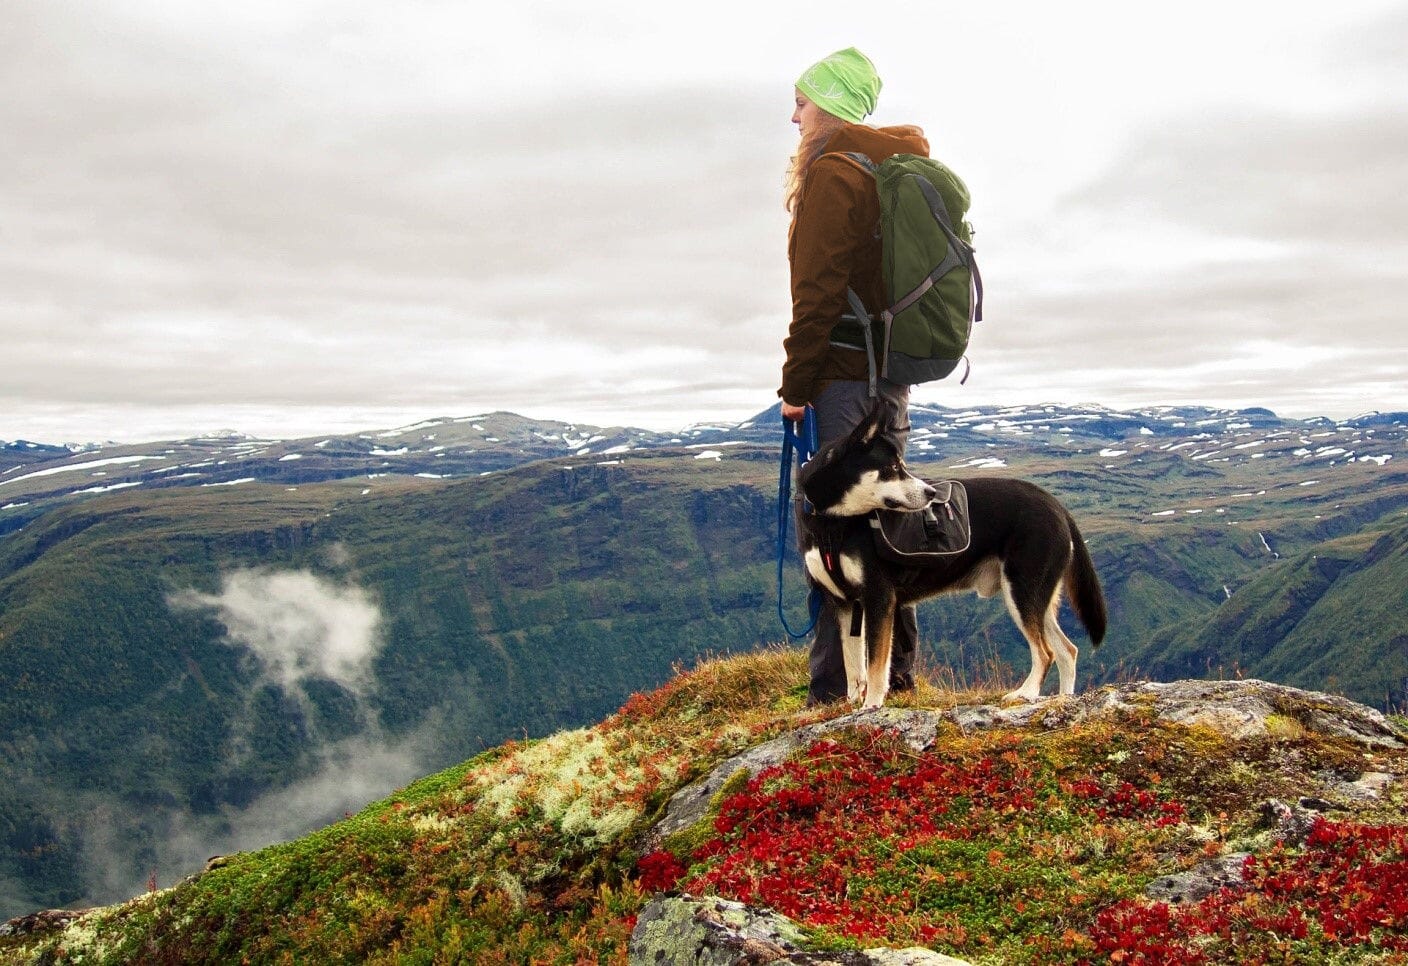 A Guide To Hiking With Your Dog